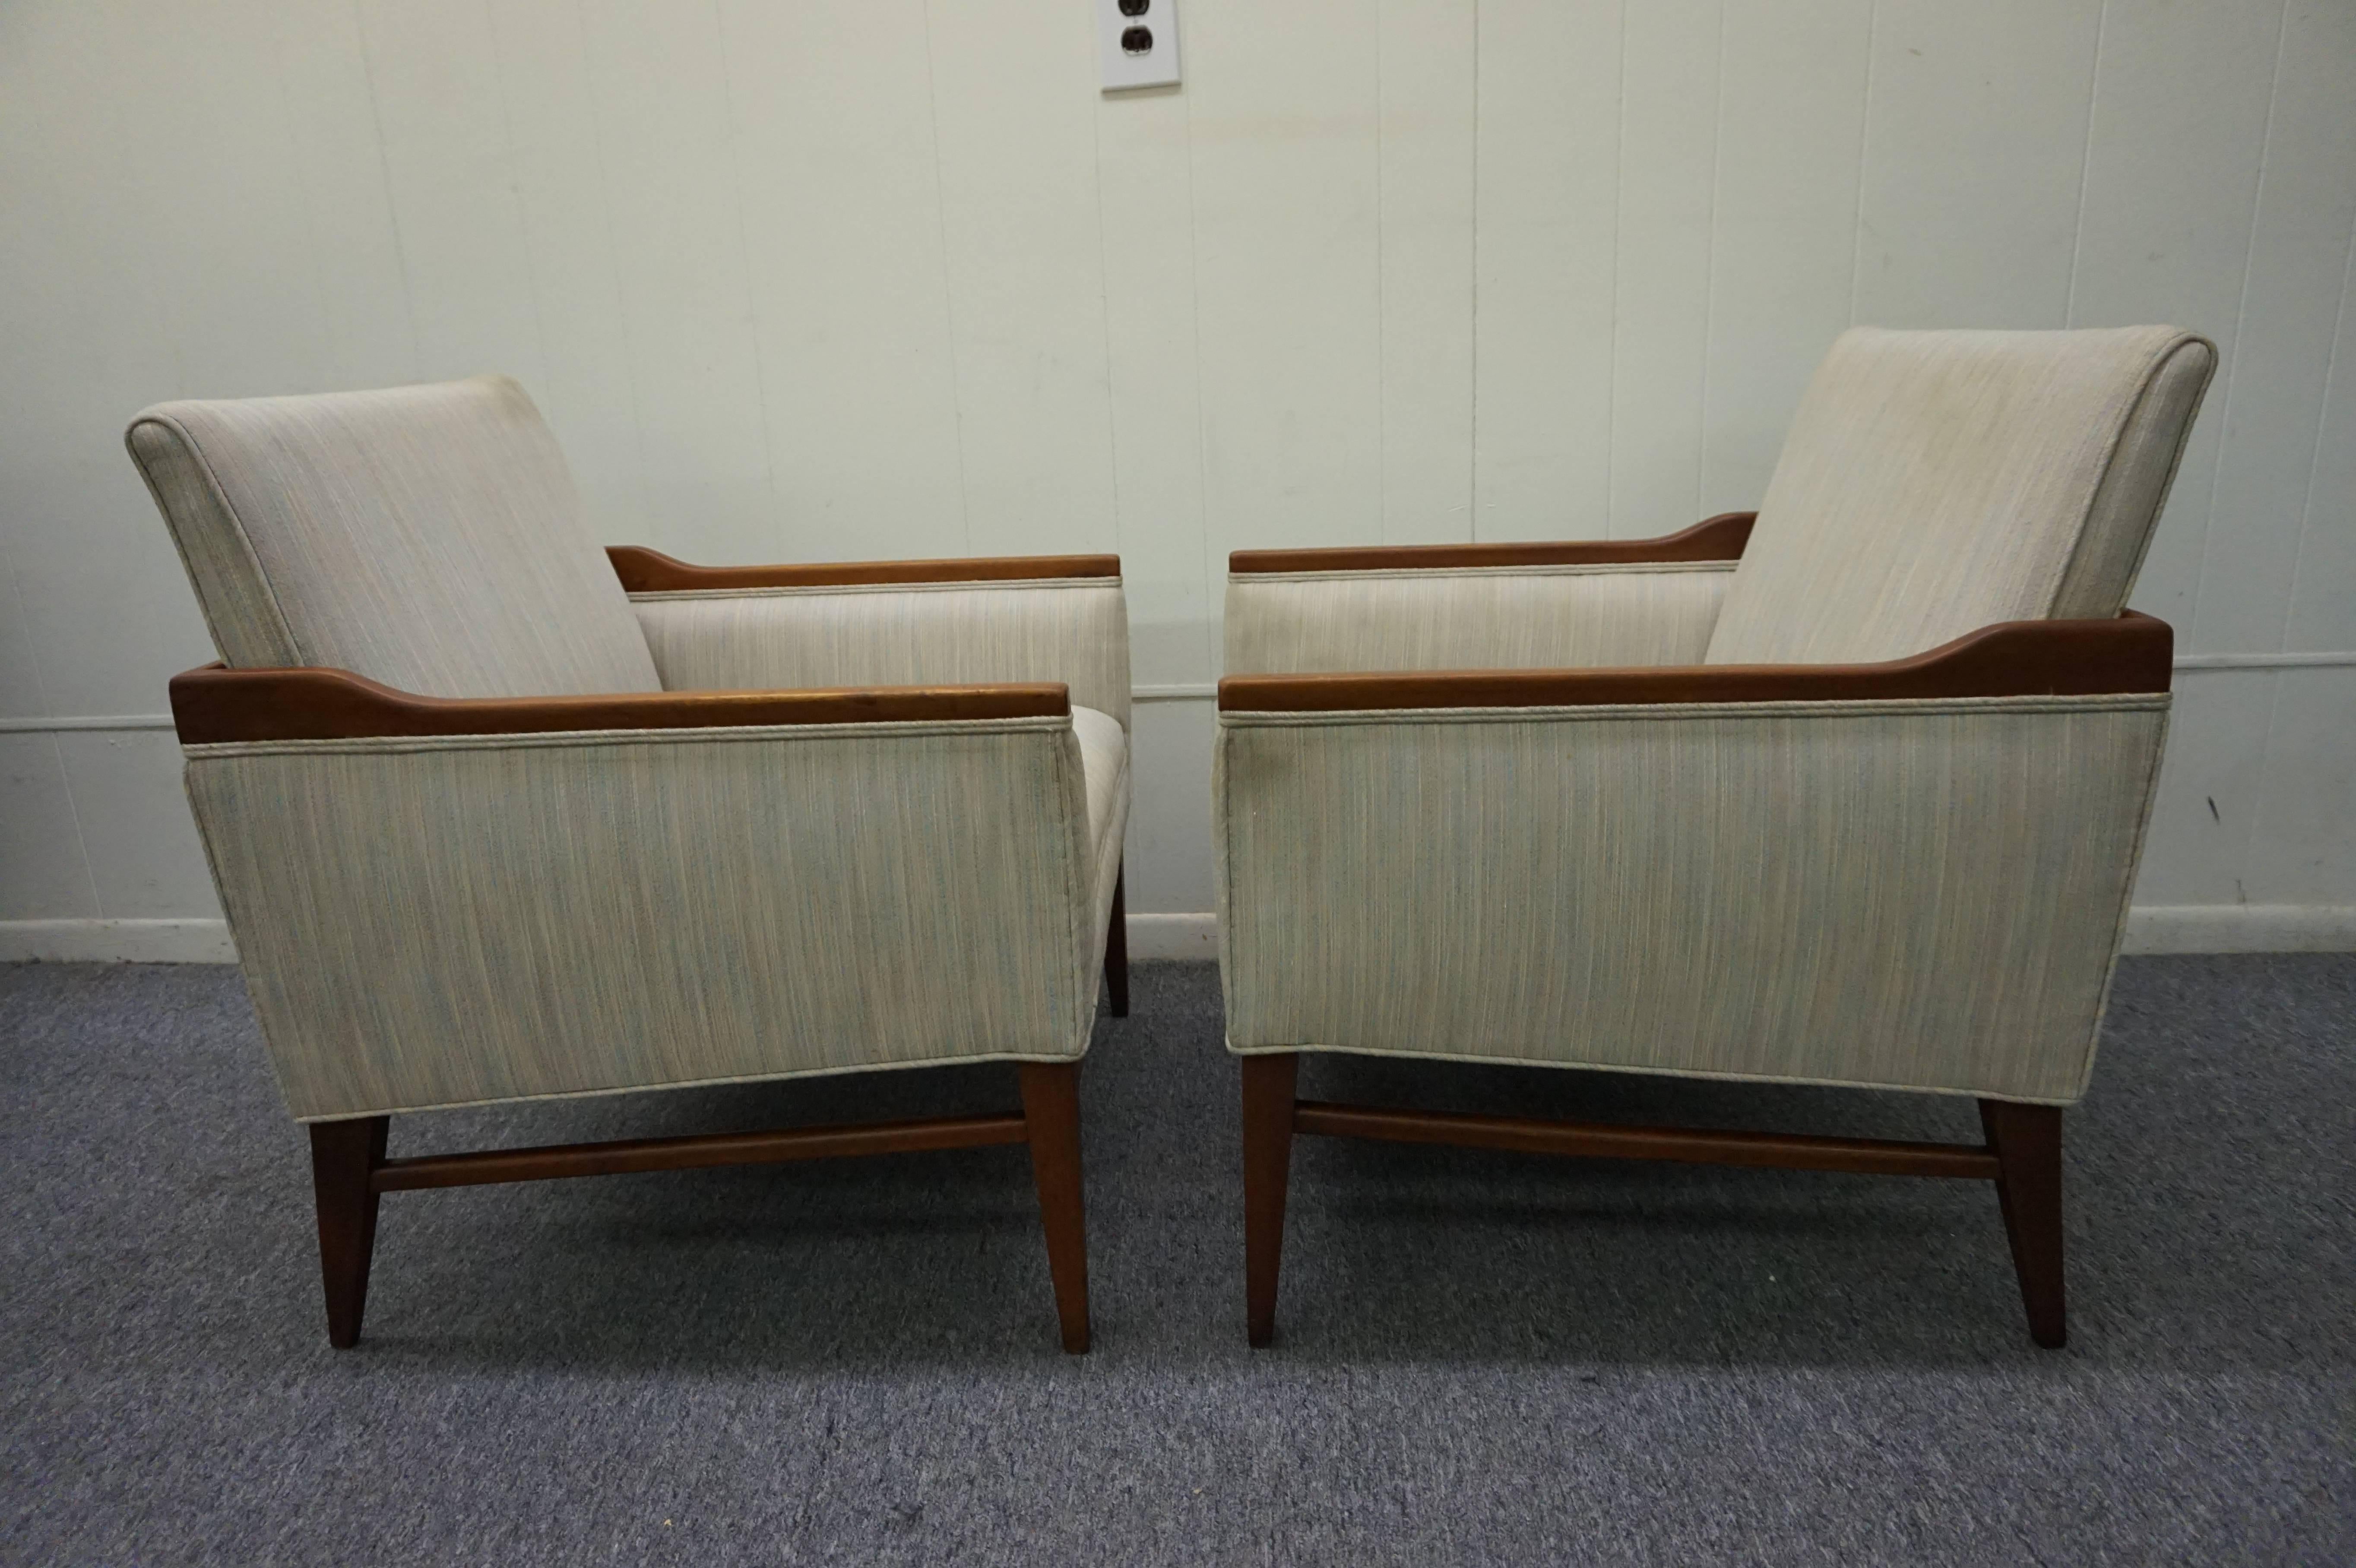 Stunning pair of American mid-century modern walnut lounge chairs.  Unusual walnut details surround the the top edge and looks quite smart.  